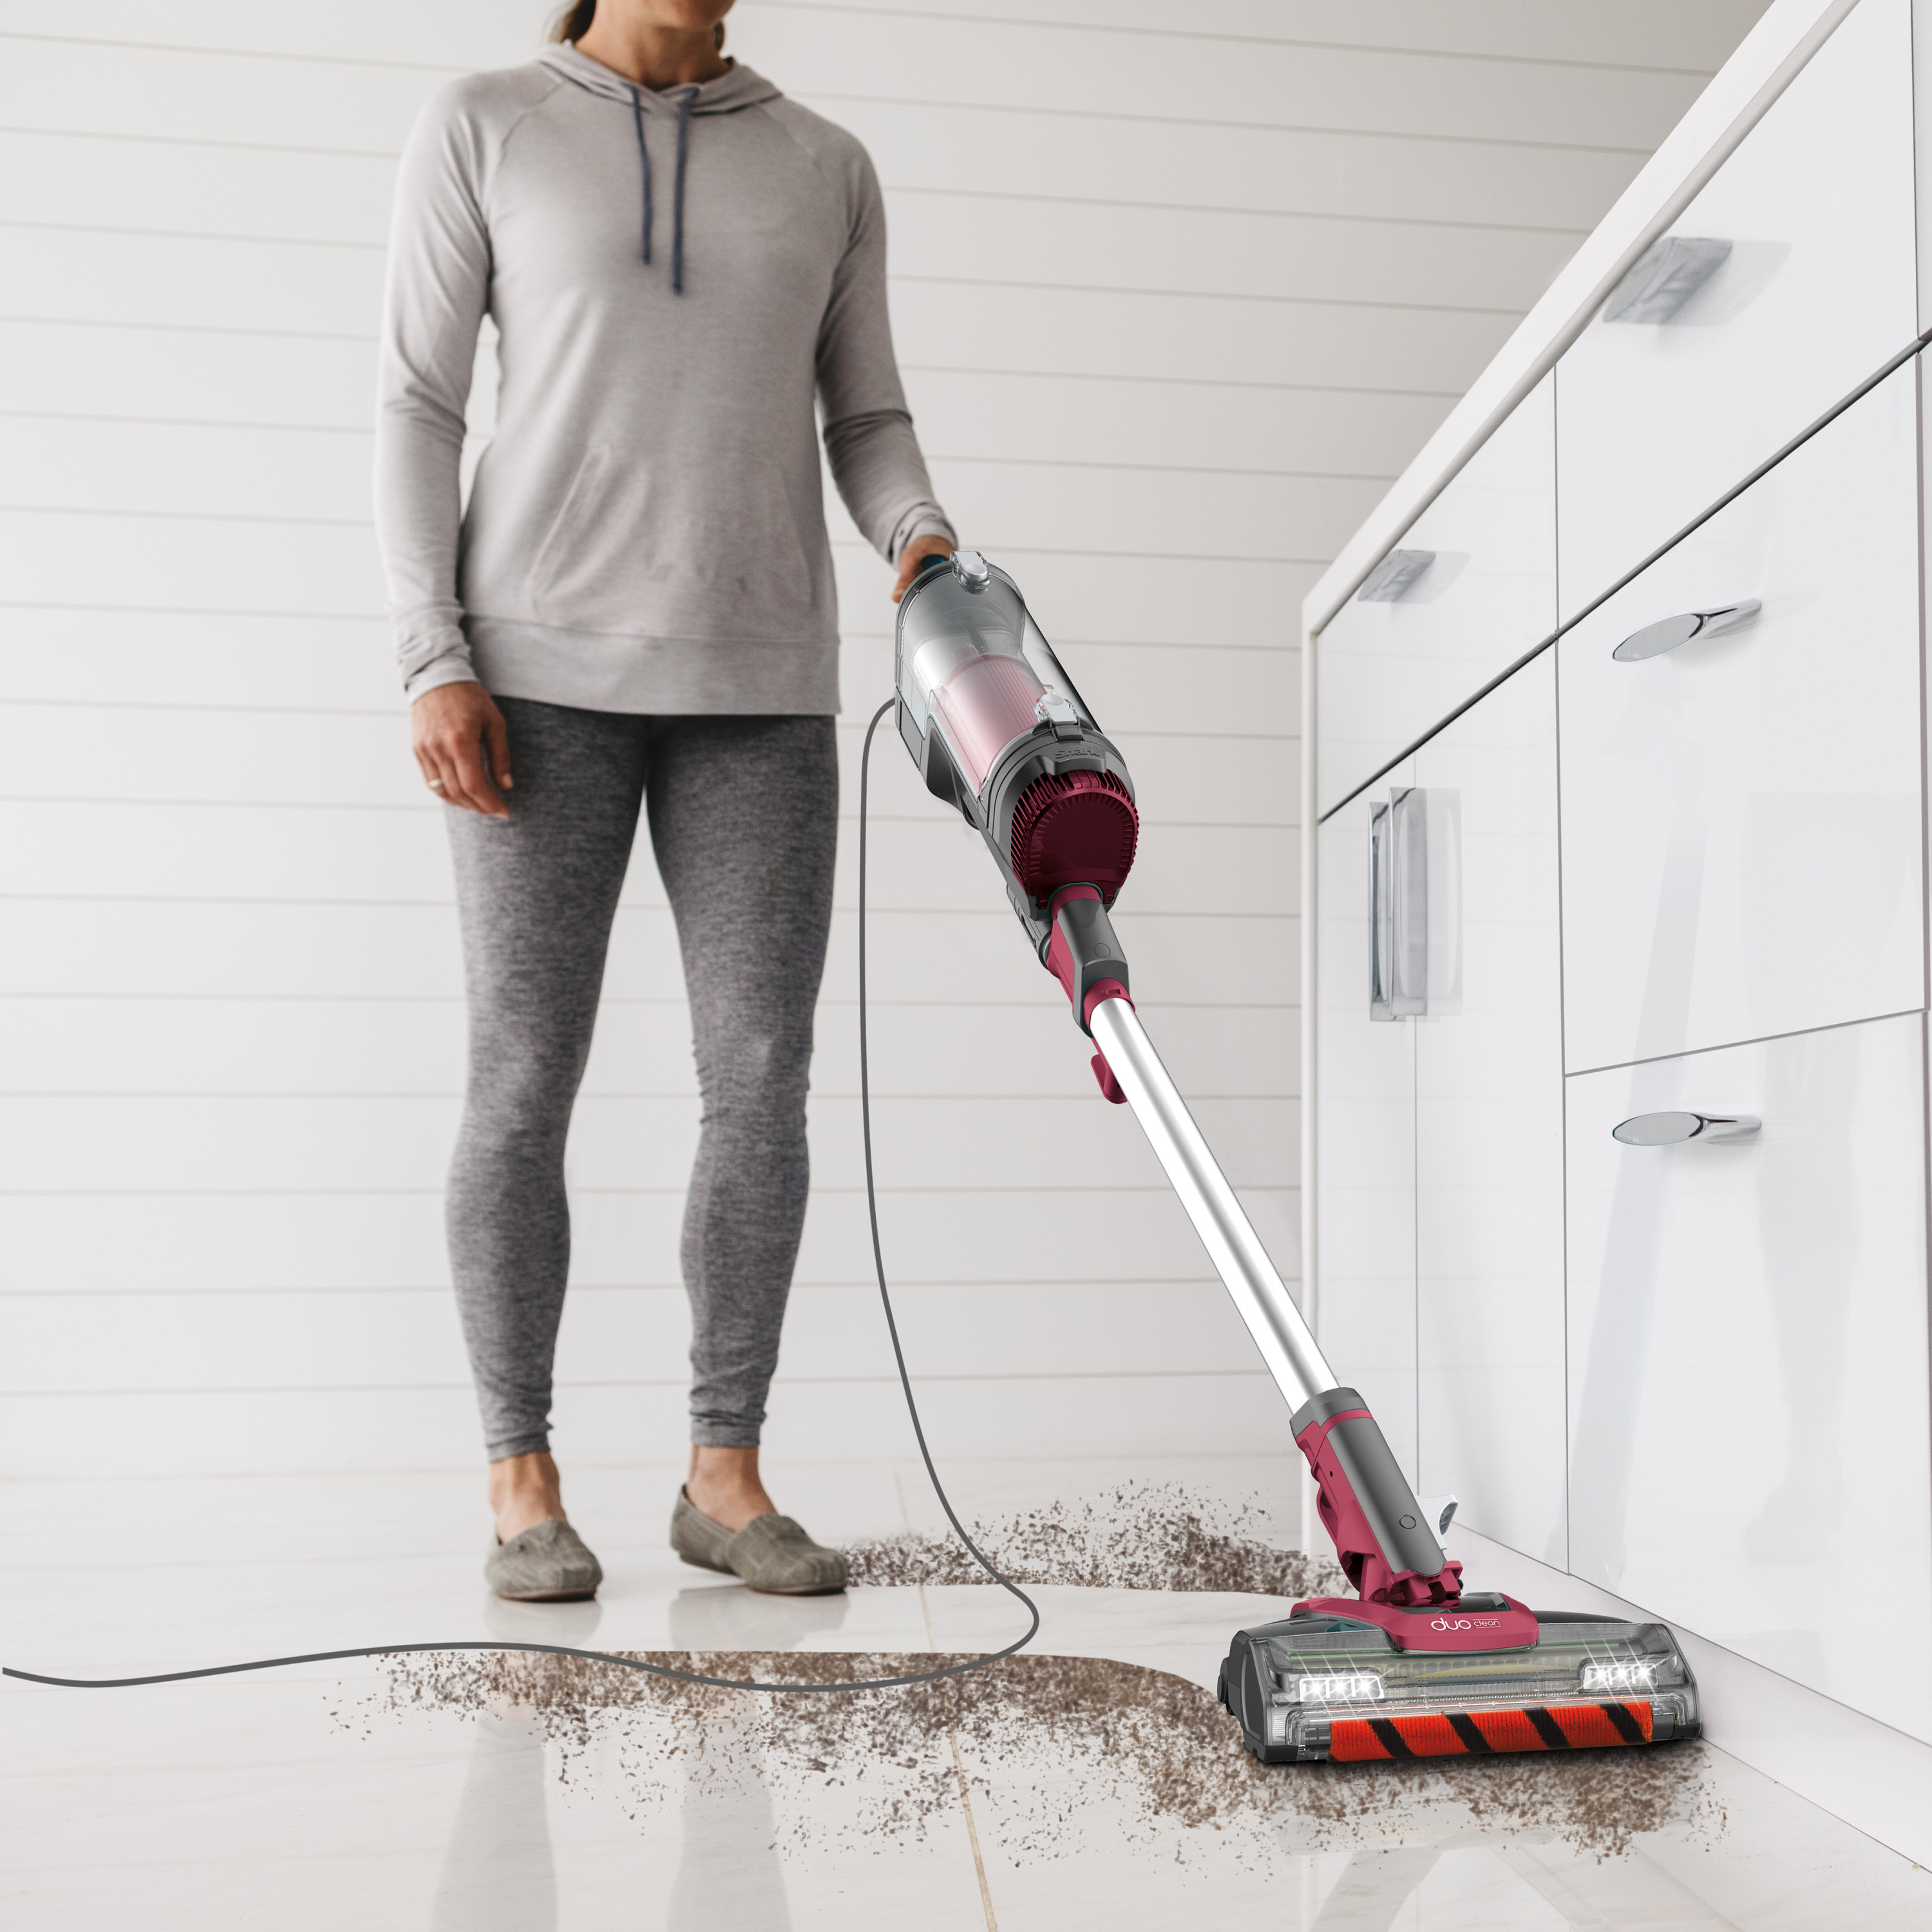 Shark Apex Uplight Lift-Away Duo Clean with Self-Cleaning Brushroll Corded Vacuum, LZ600 - image 2 of 9